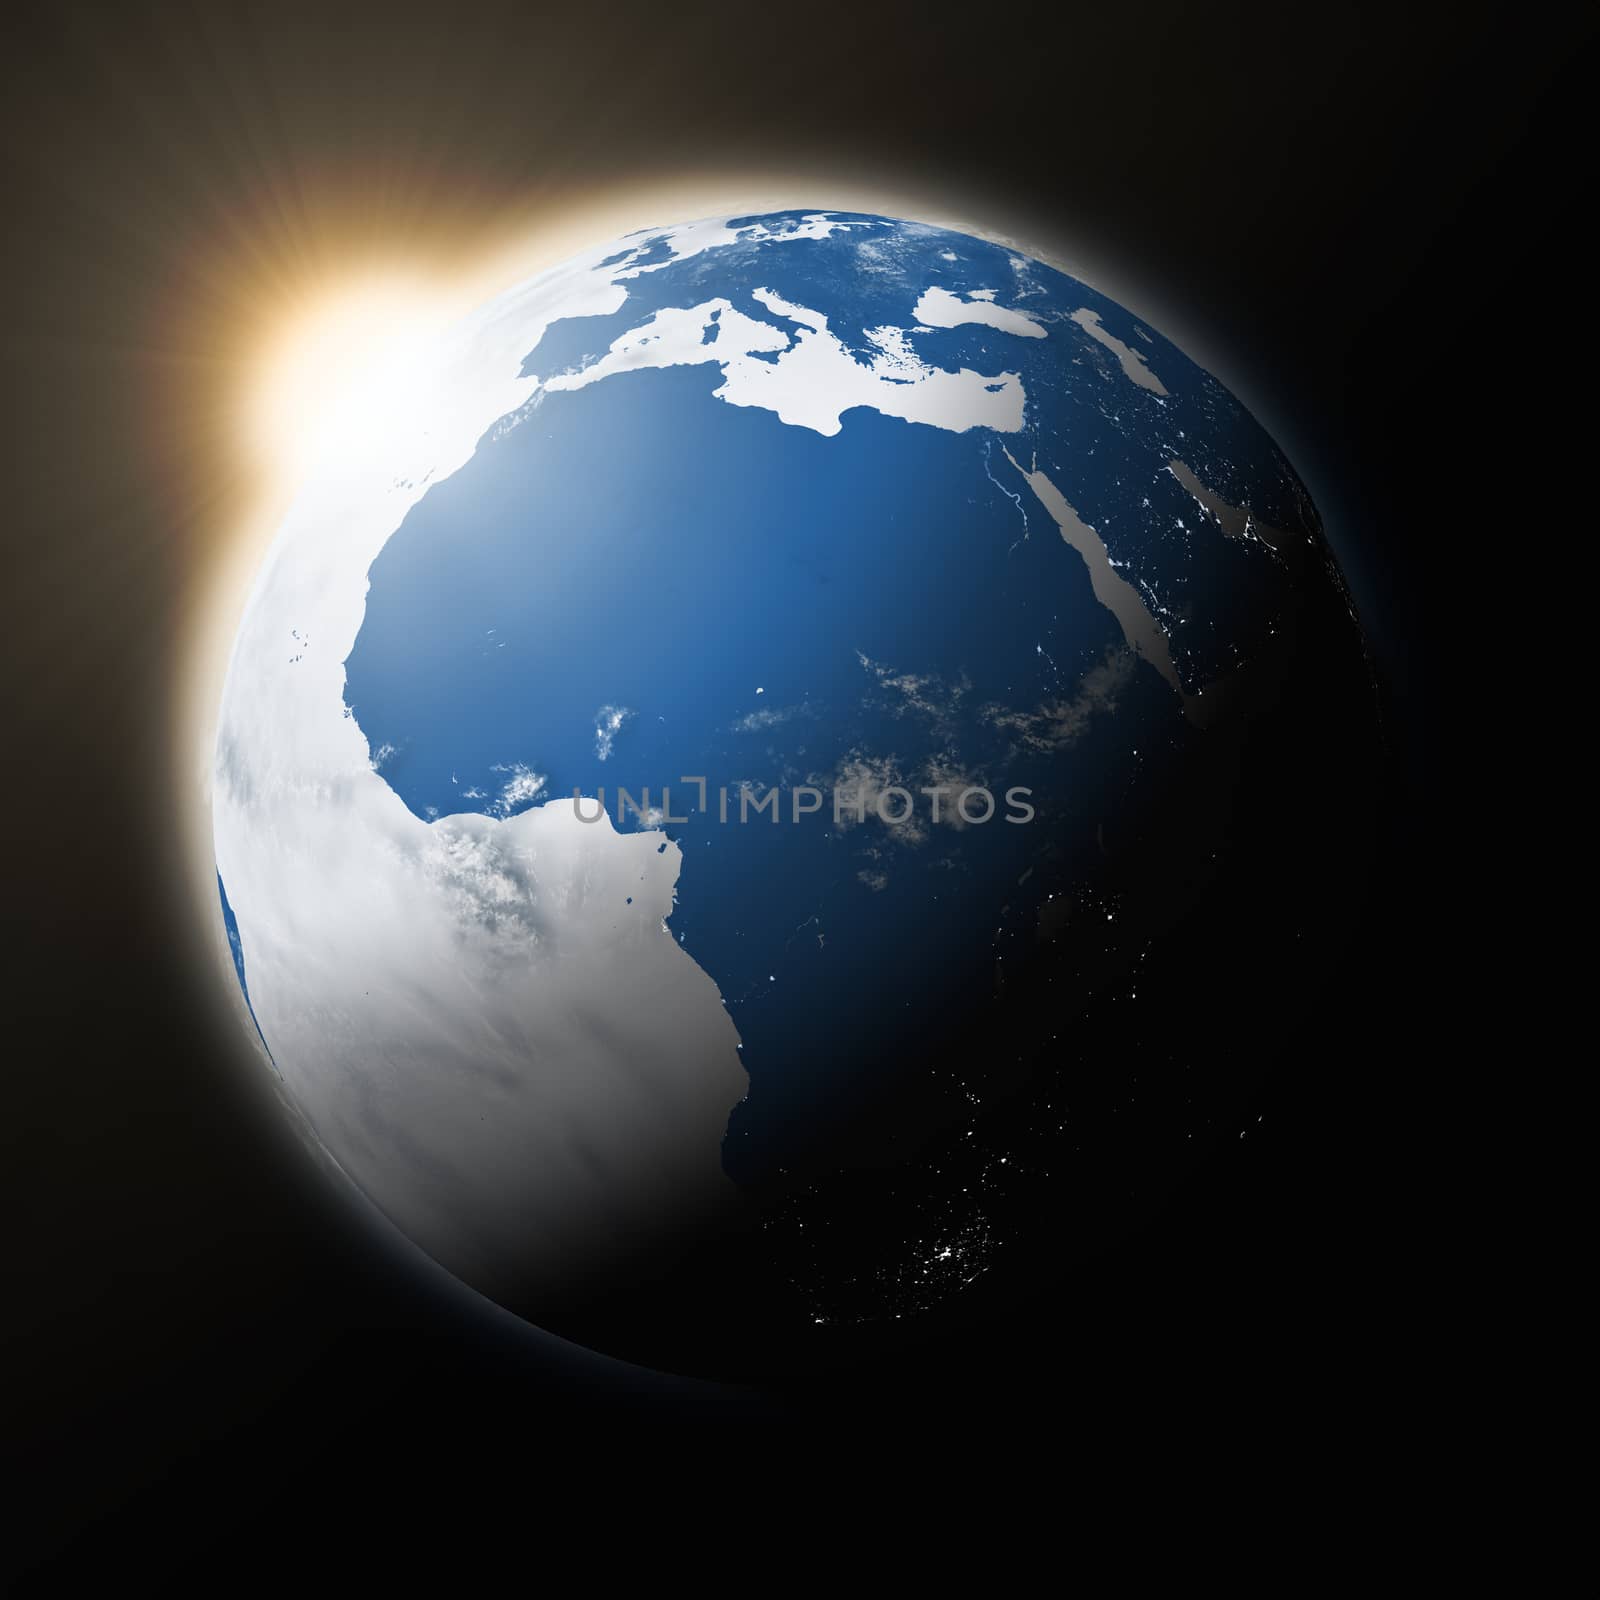 Sun over Africa on planet Earth by Harvepino